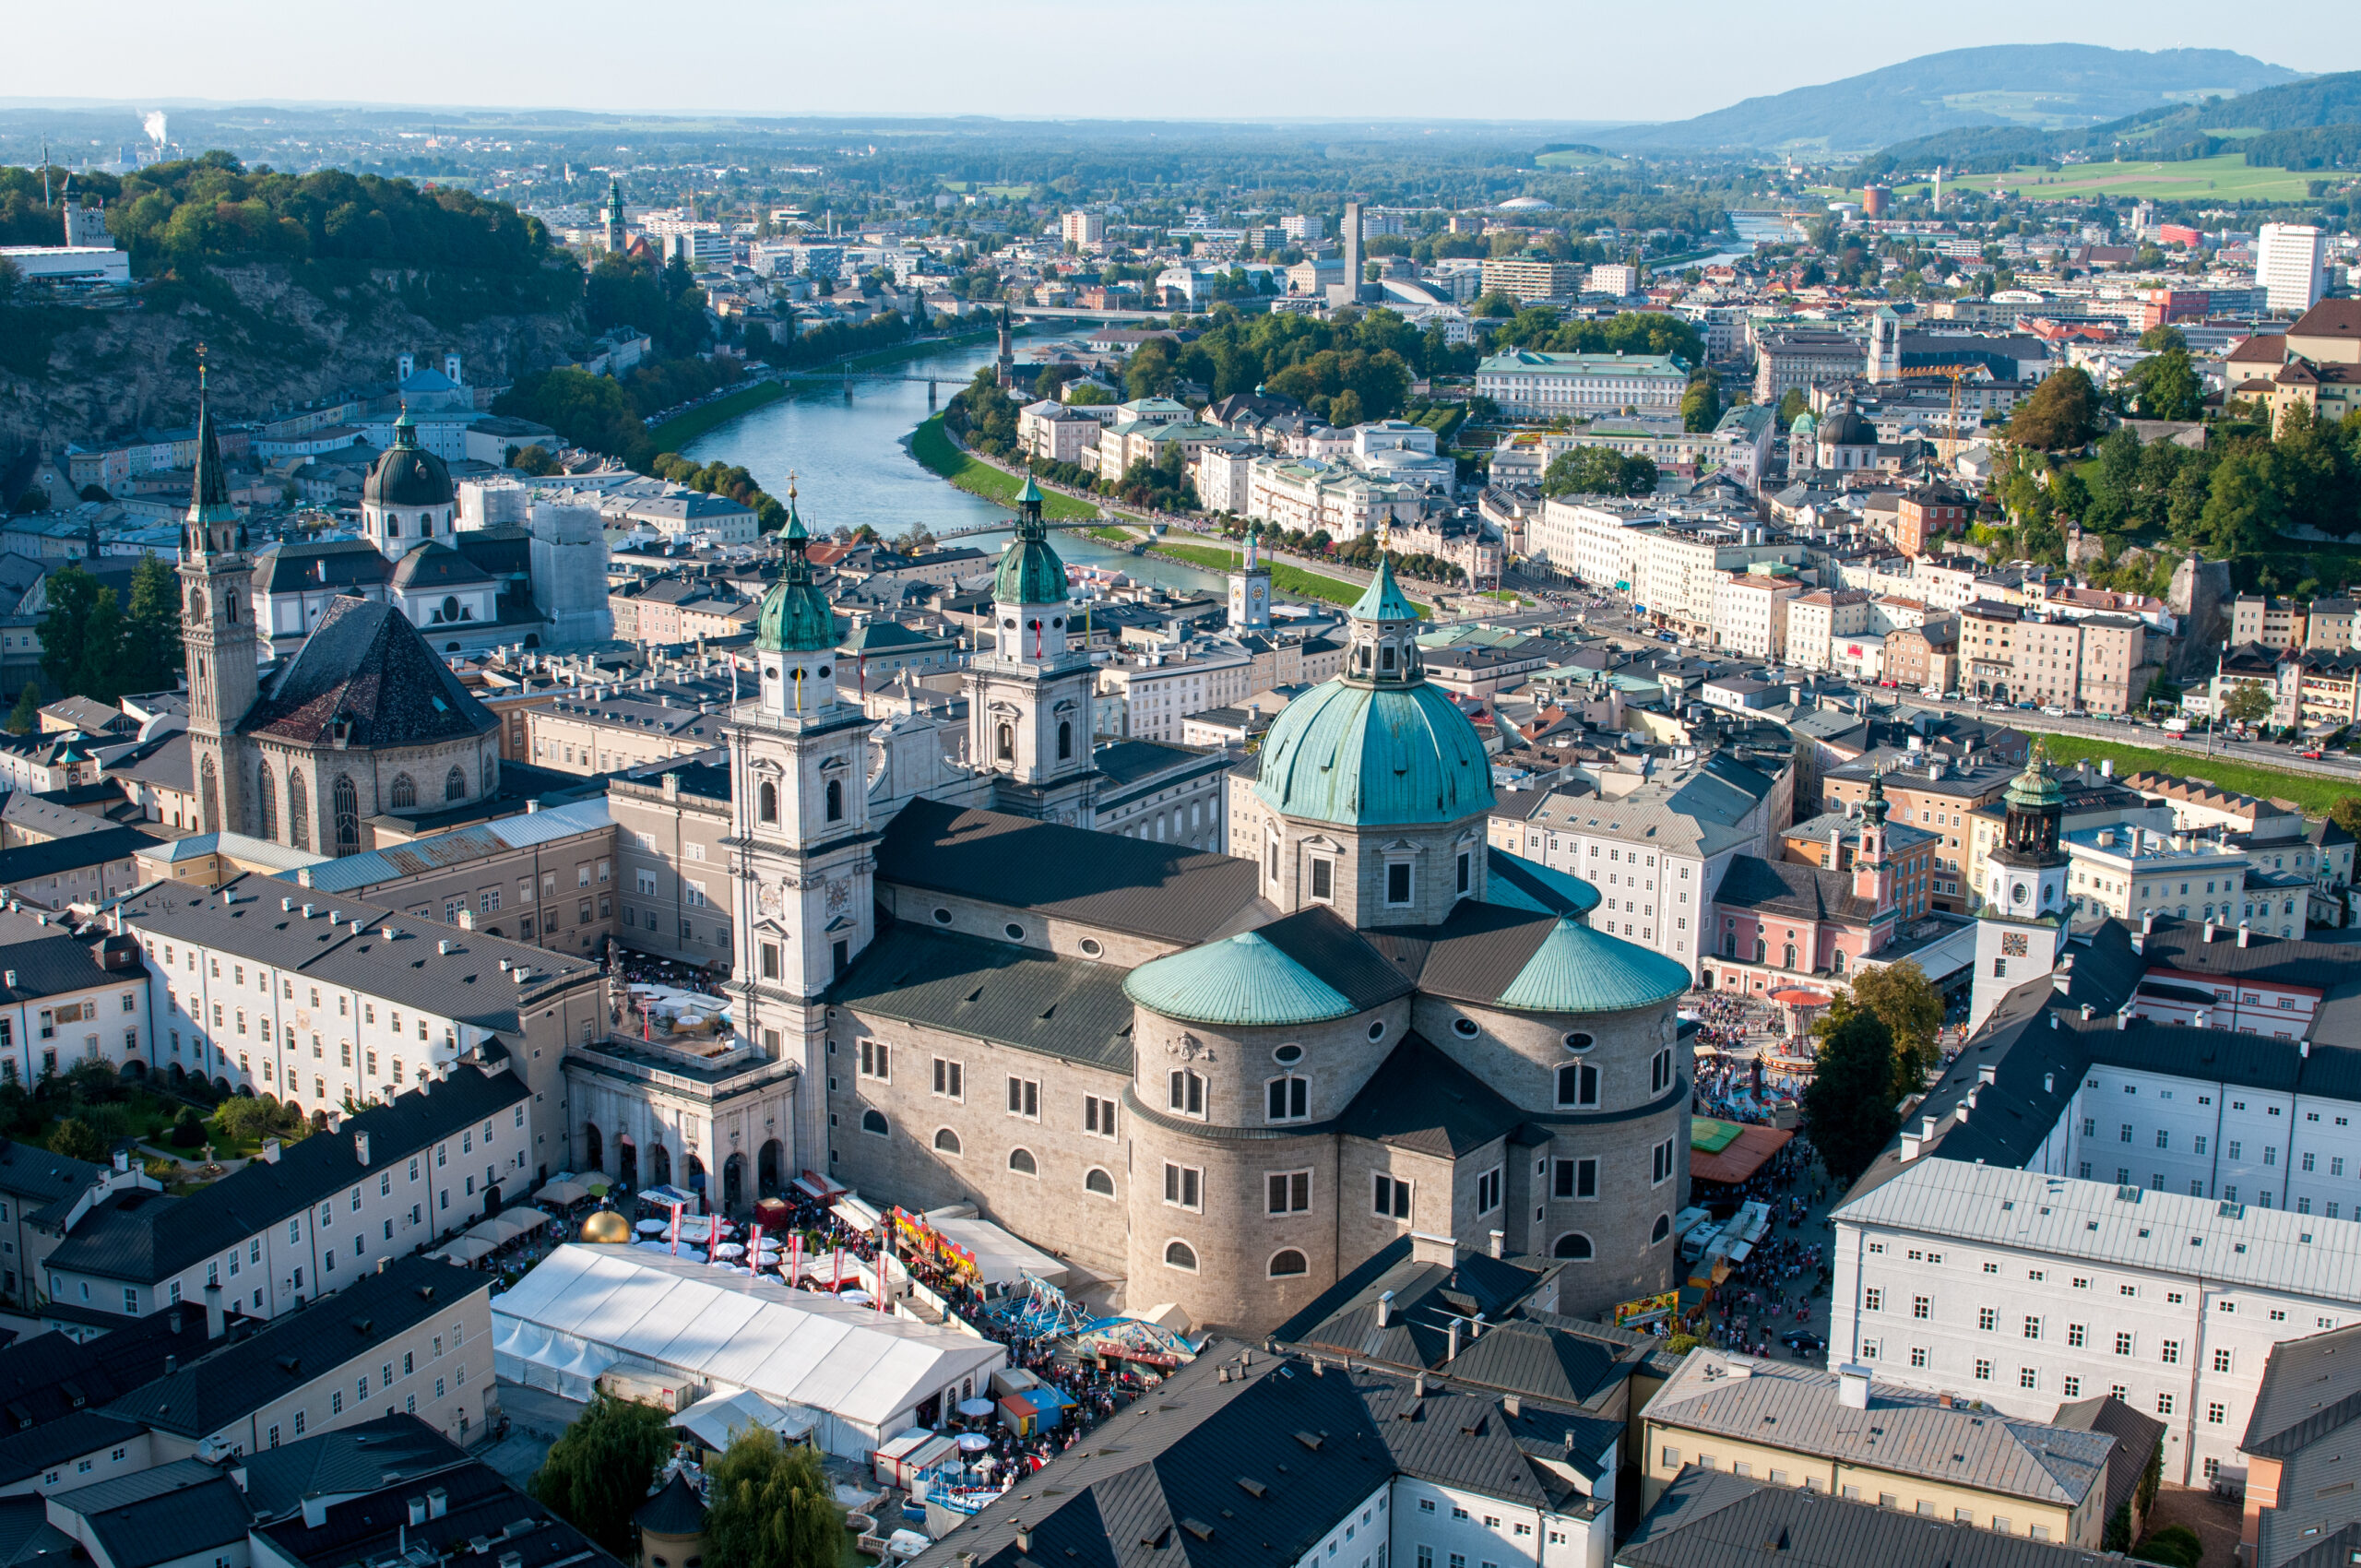 Photo: Cityscape of  the famous and picturesque Salzburg holiday tourist resort city in Austria, Europe